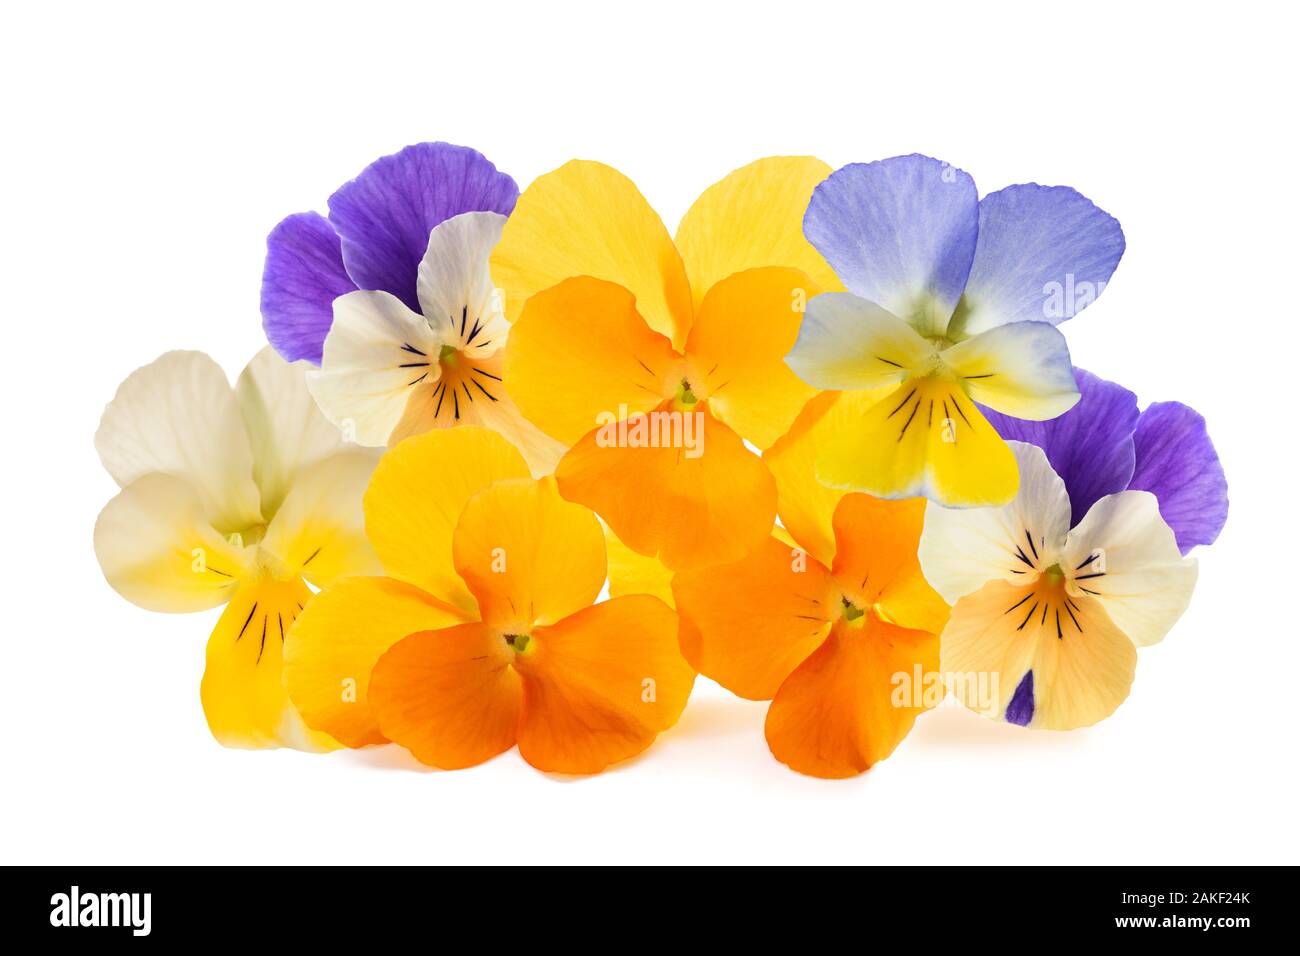 Pansy flowers pile isolated on white background Stock Photo